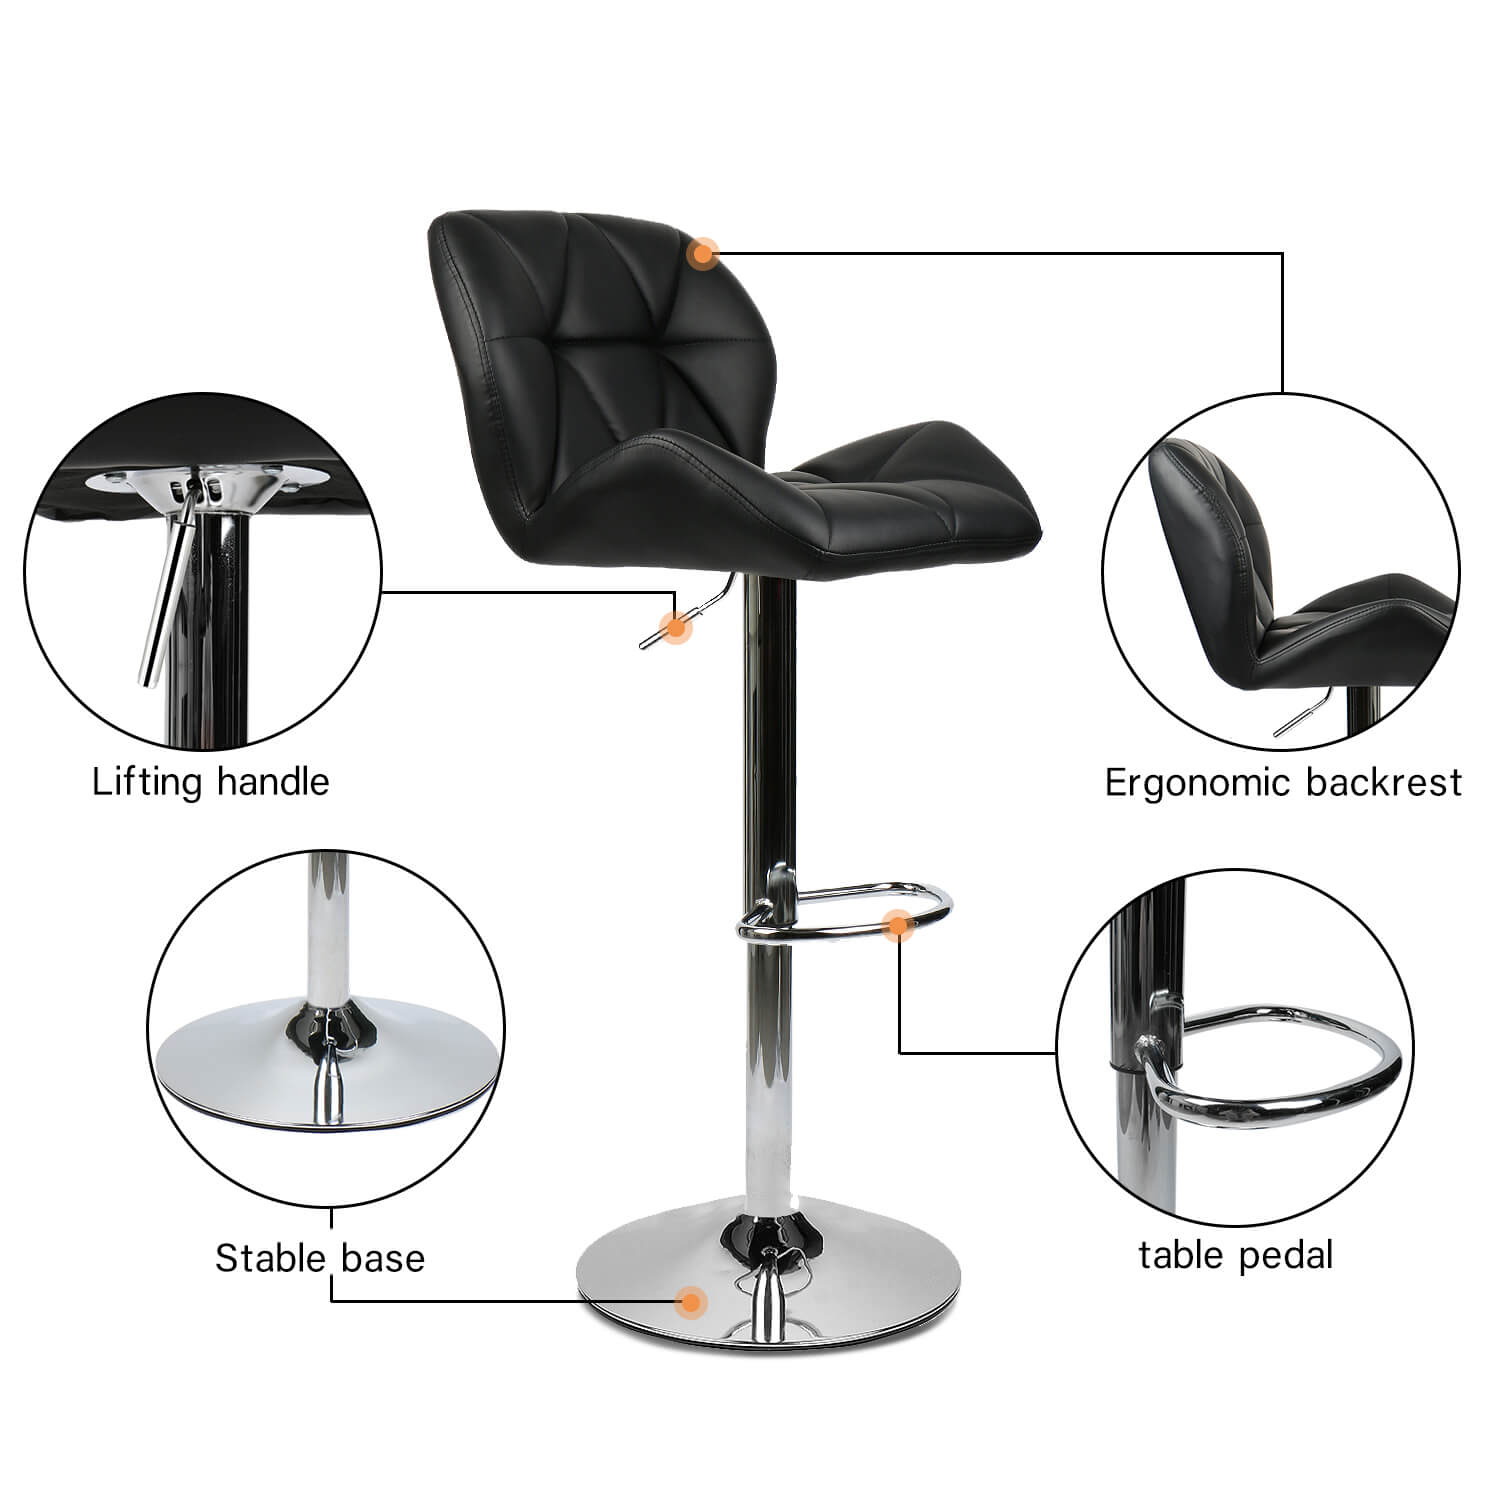 Elecwish black bar stool has four features